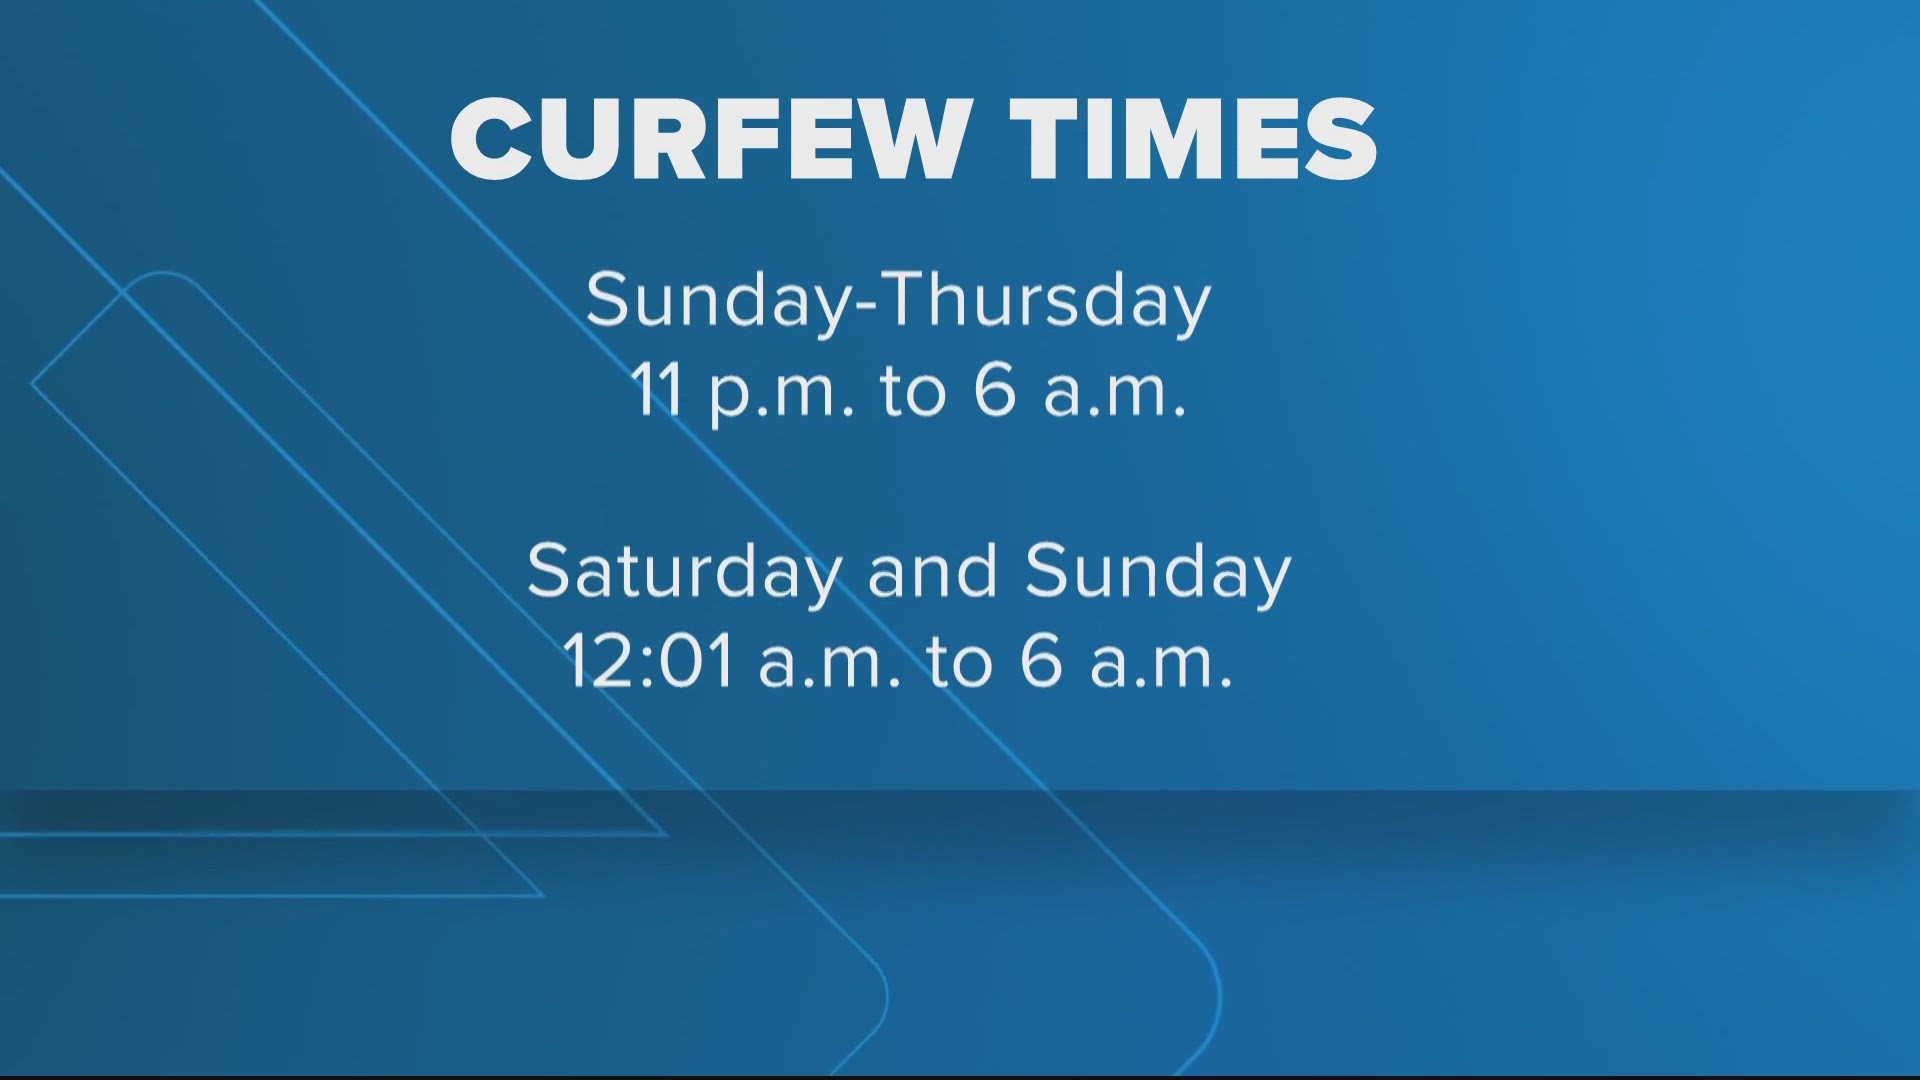 The curfew will apply to anyone younger than 17 years old starting as early as 11 p.m.